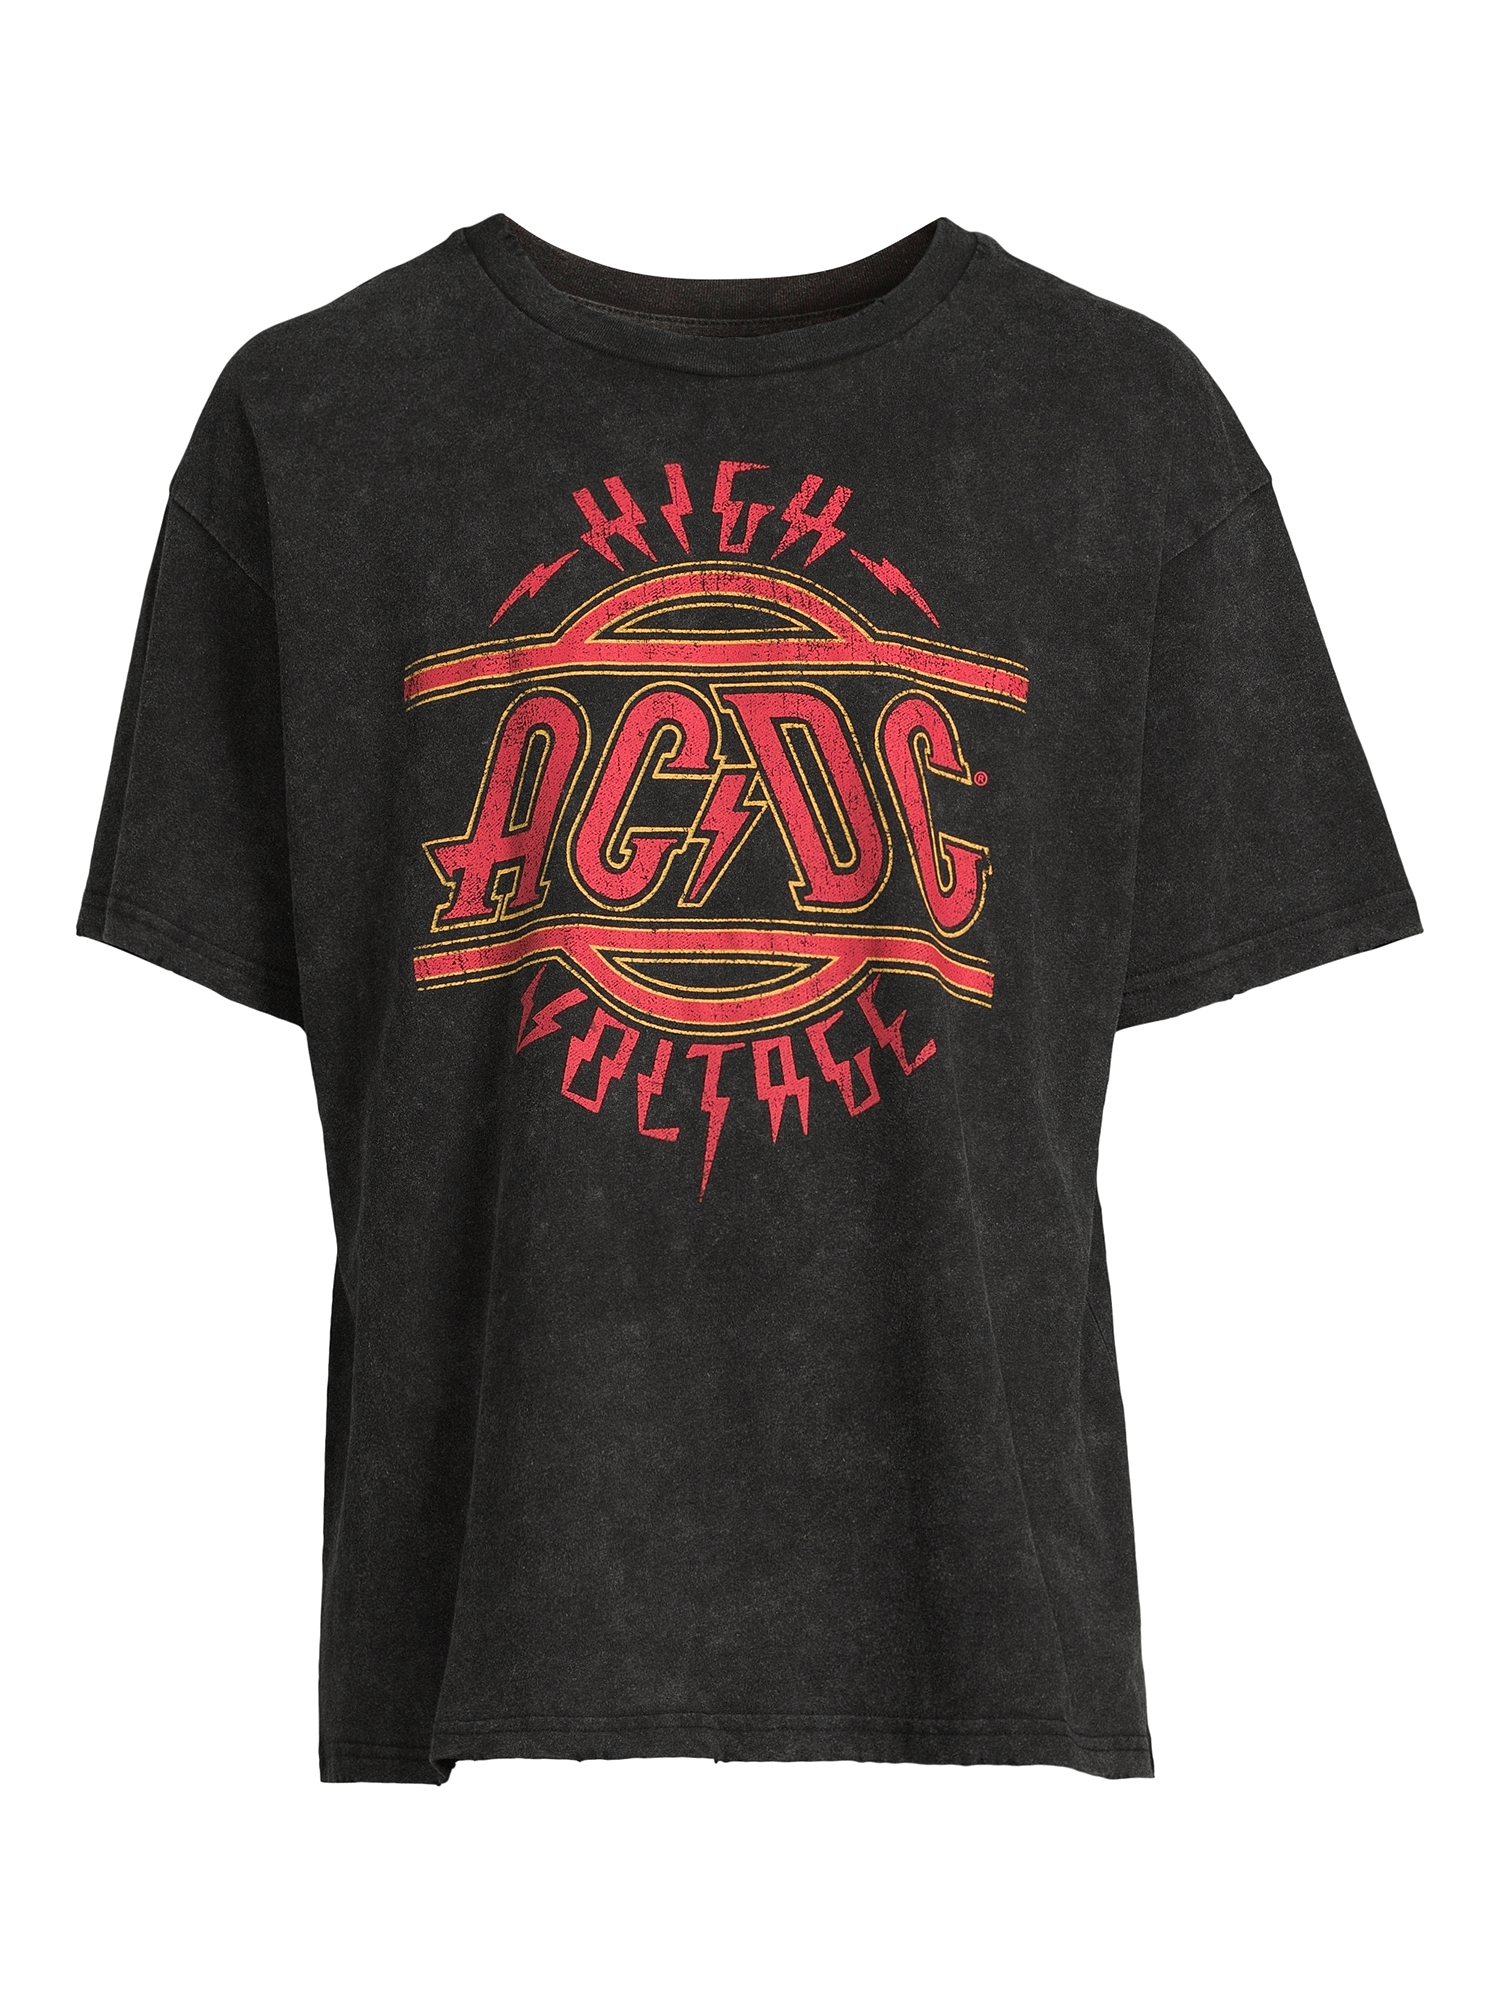 ACDC Men’s and Big Men’s Oversized Graphic Band Tee, Sizes XS-3XL - image 5 of 5